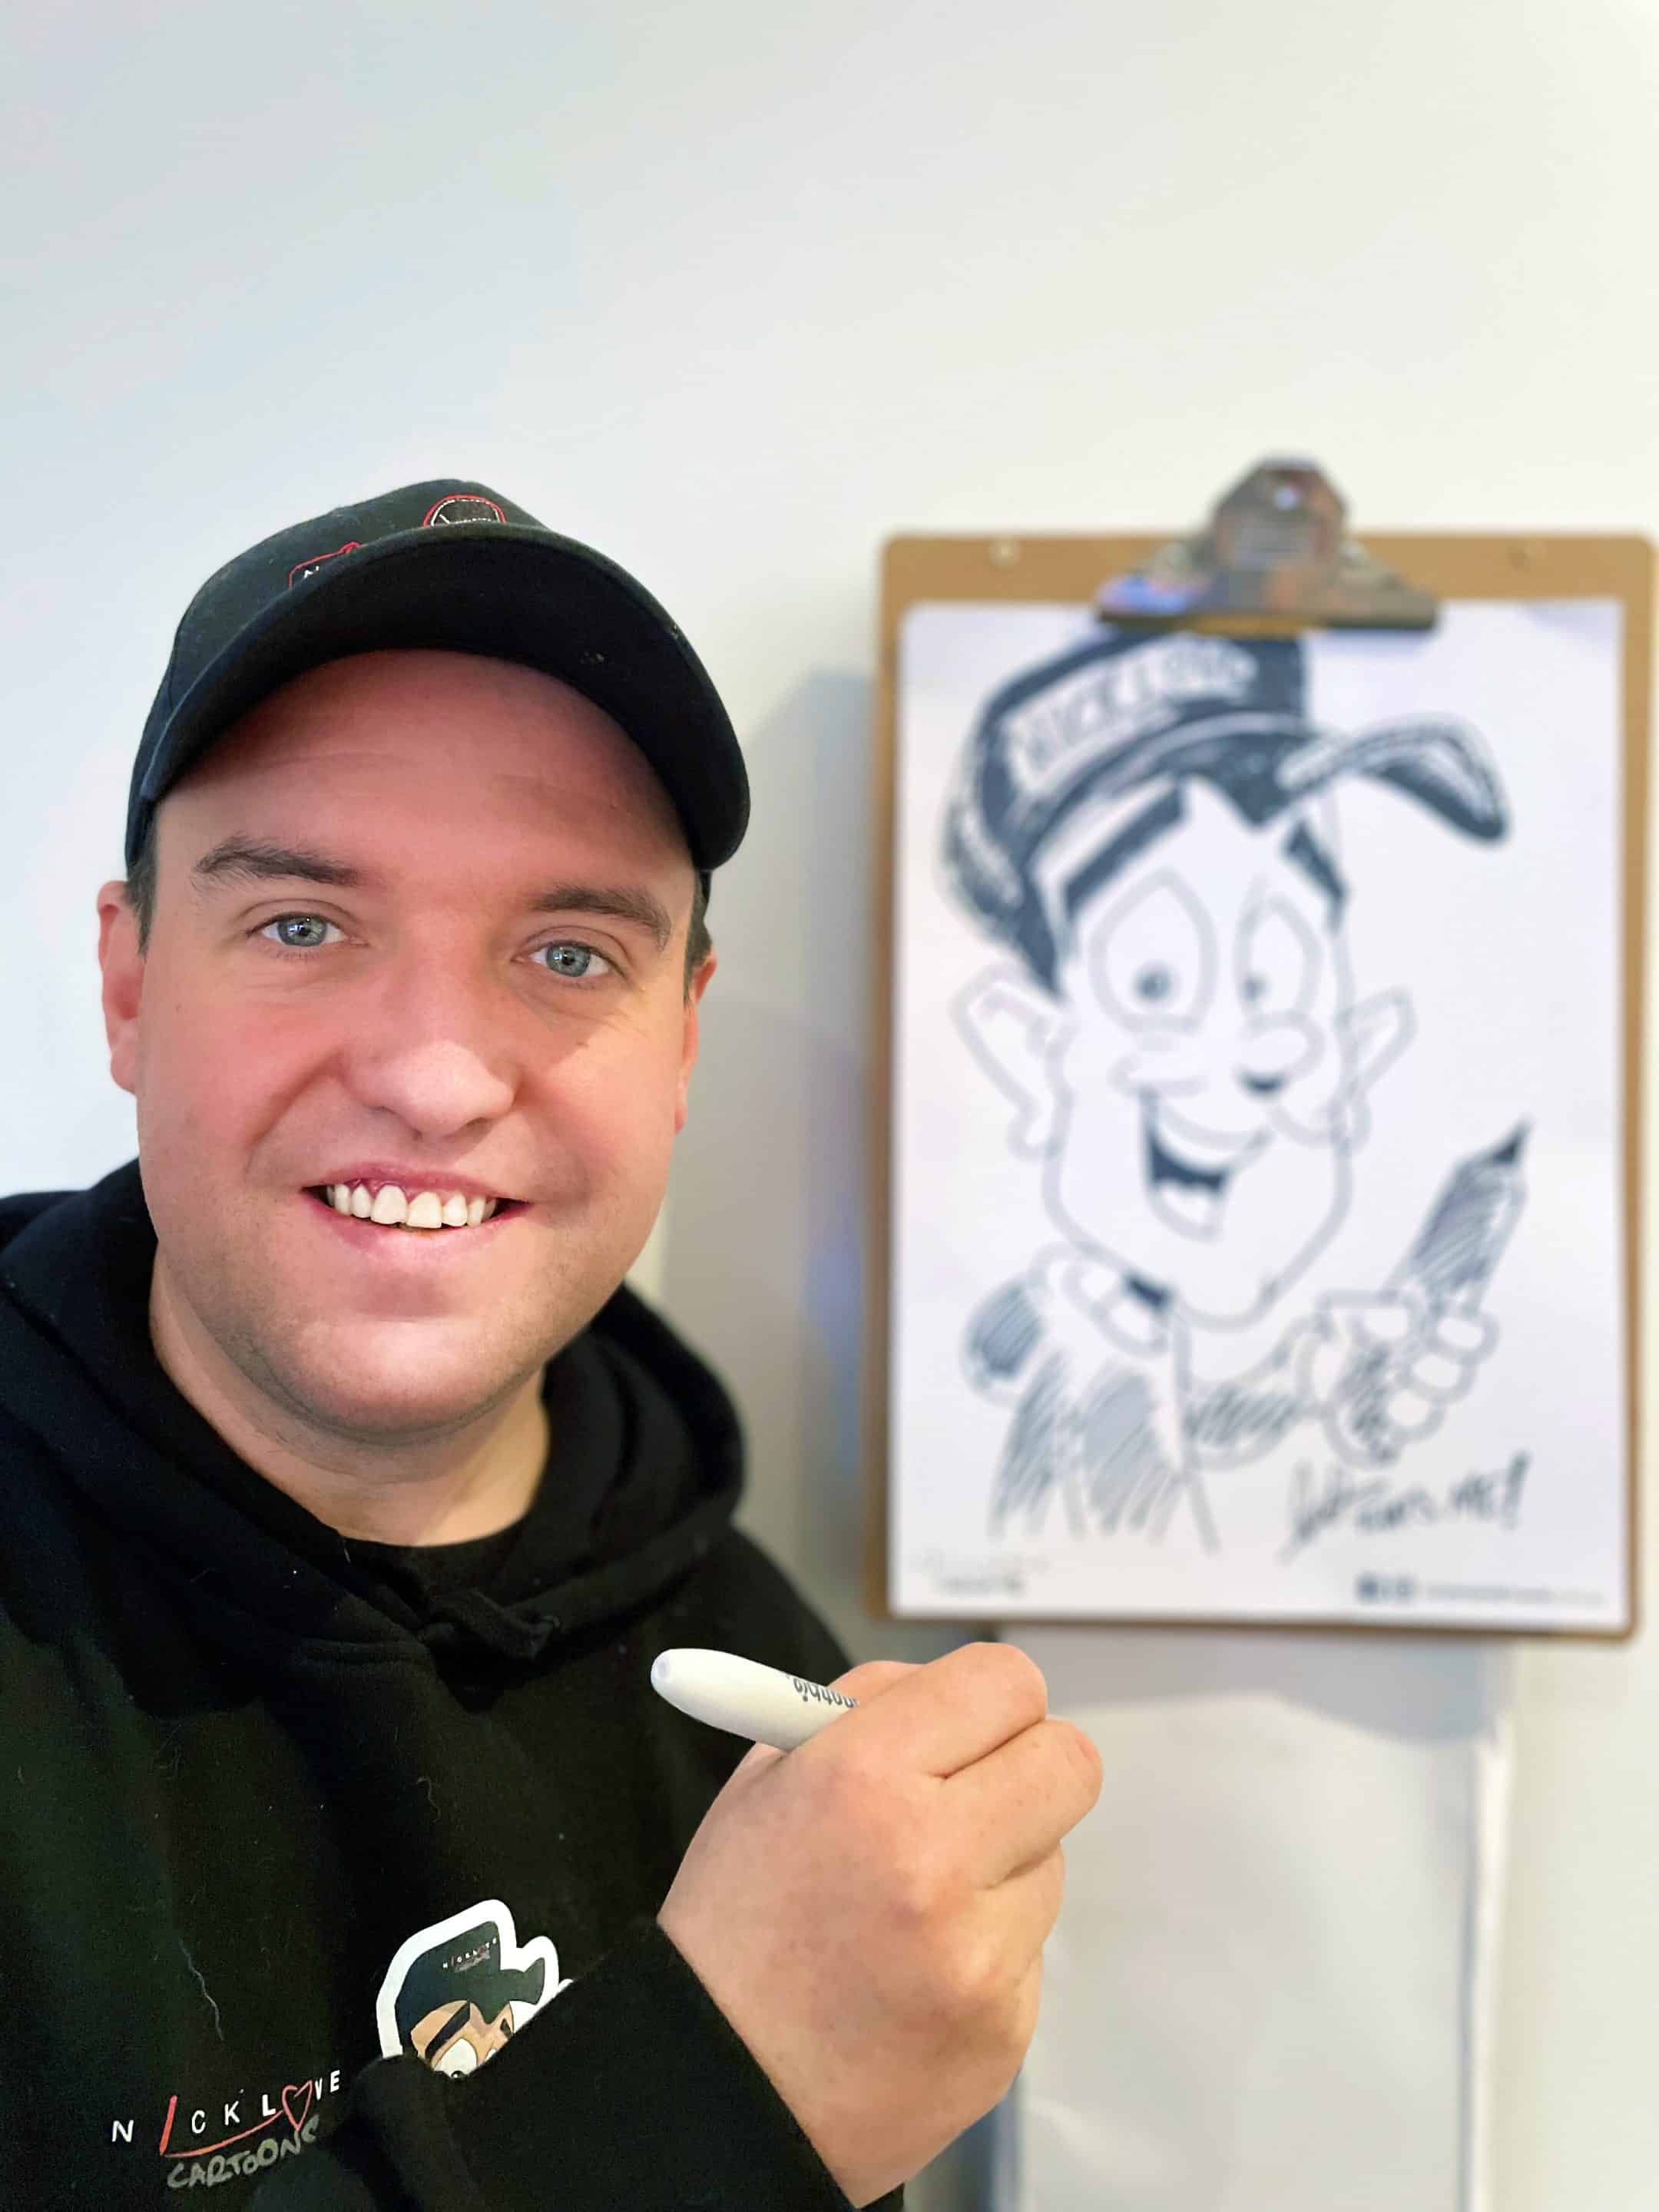 Profile picture of Nick Love smiling while drawing a caricature of himself